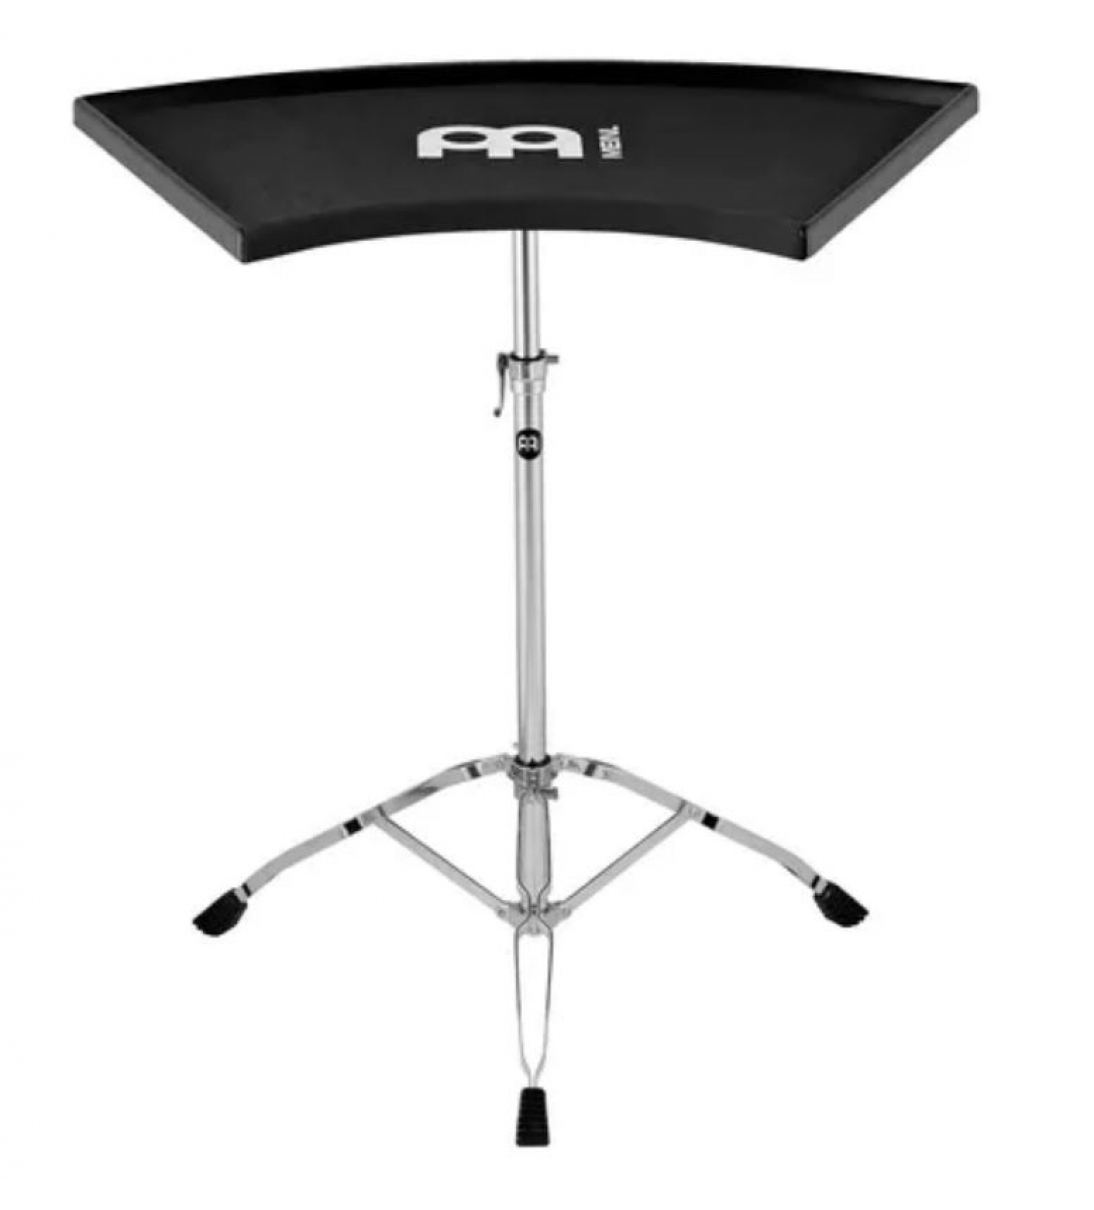 TMPETS Ergo Percussion Table Stand